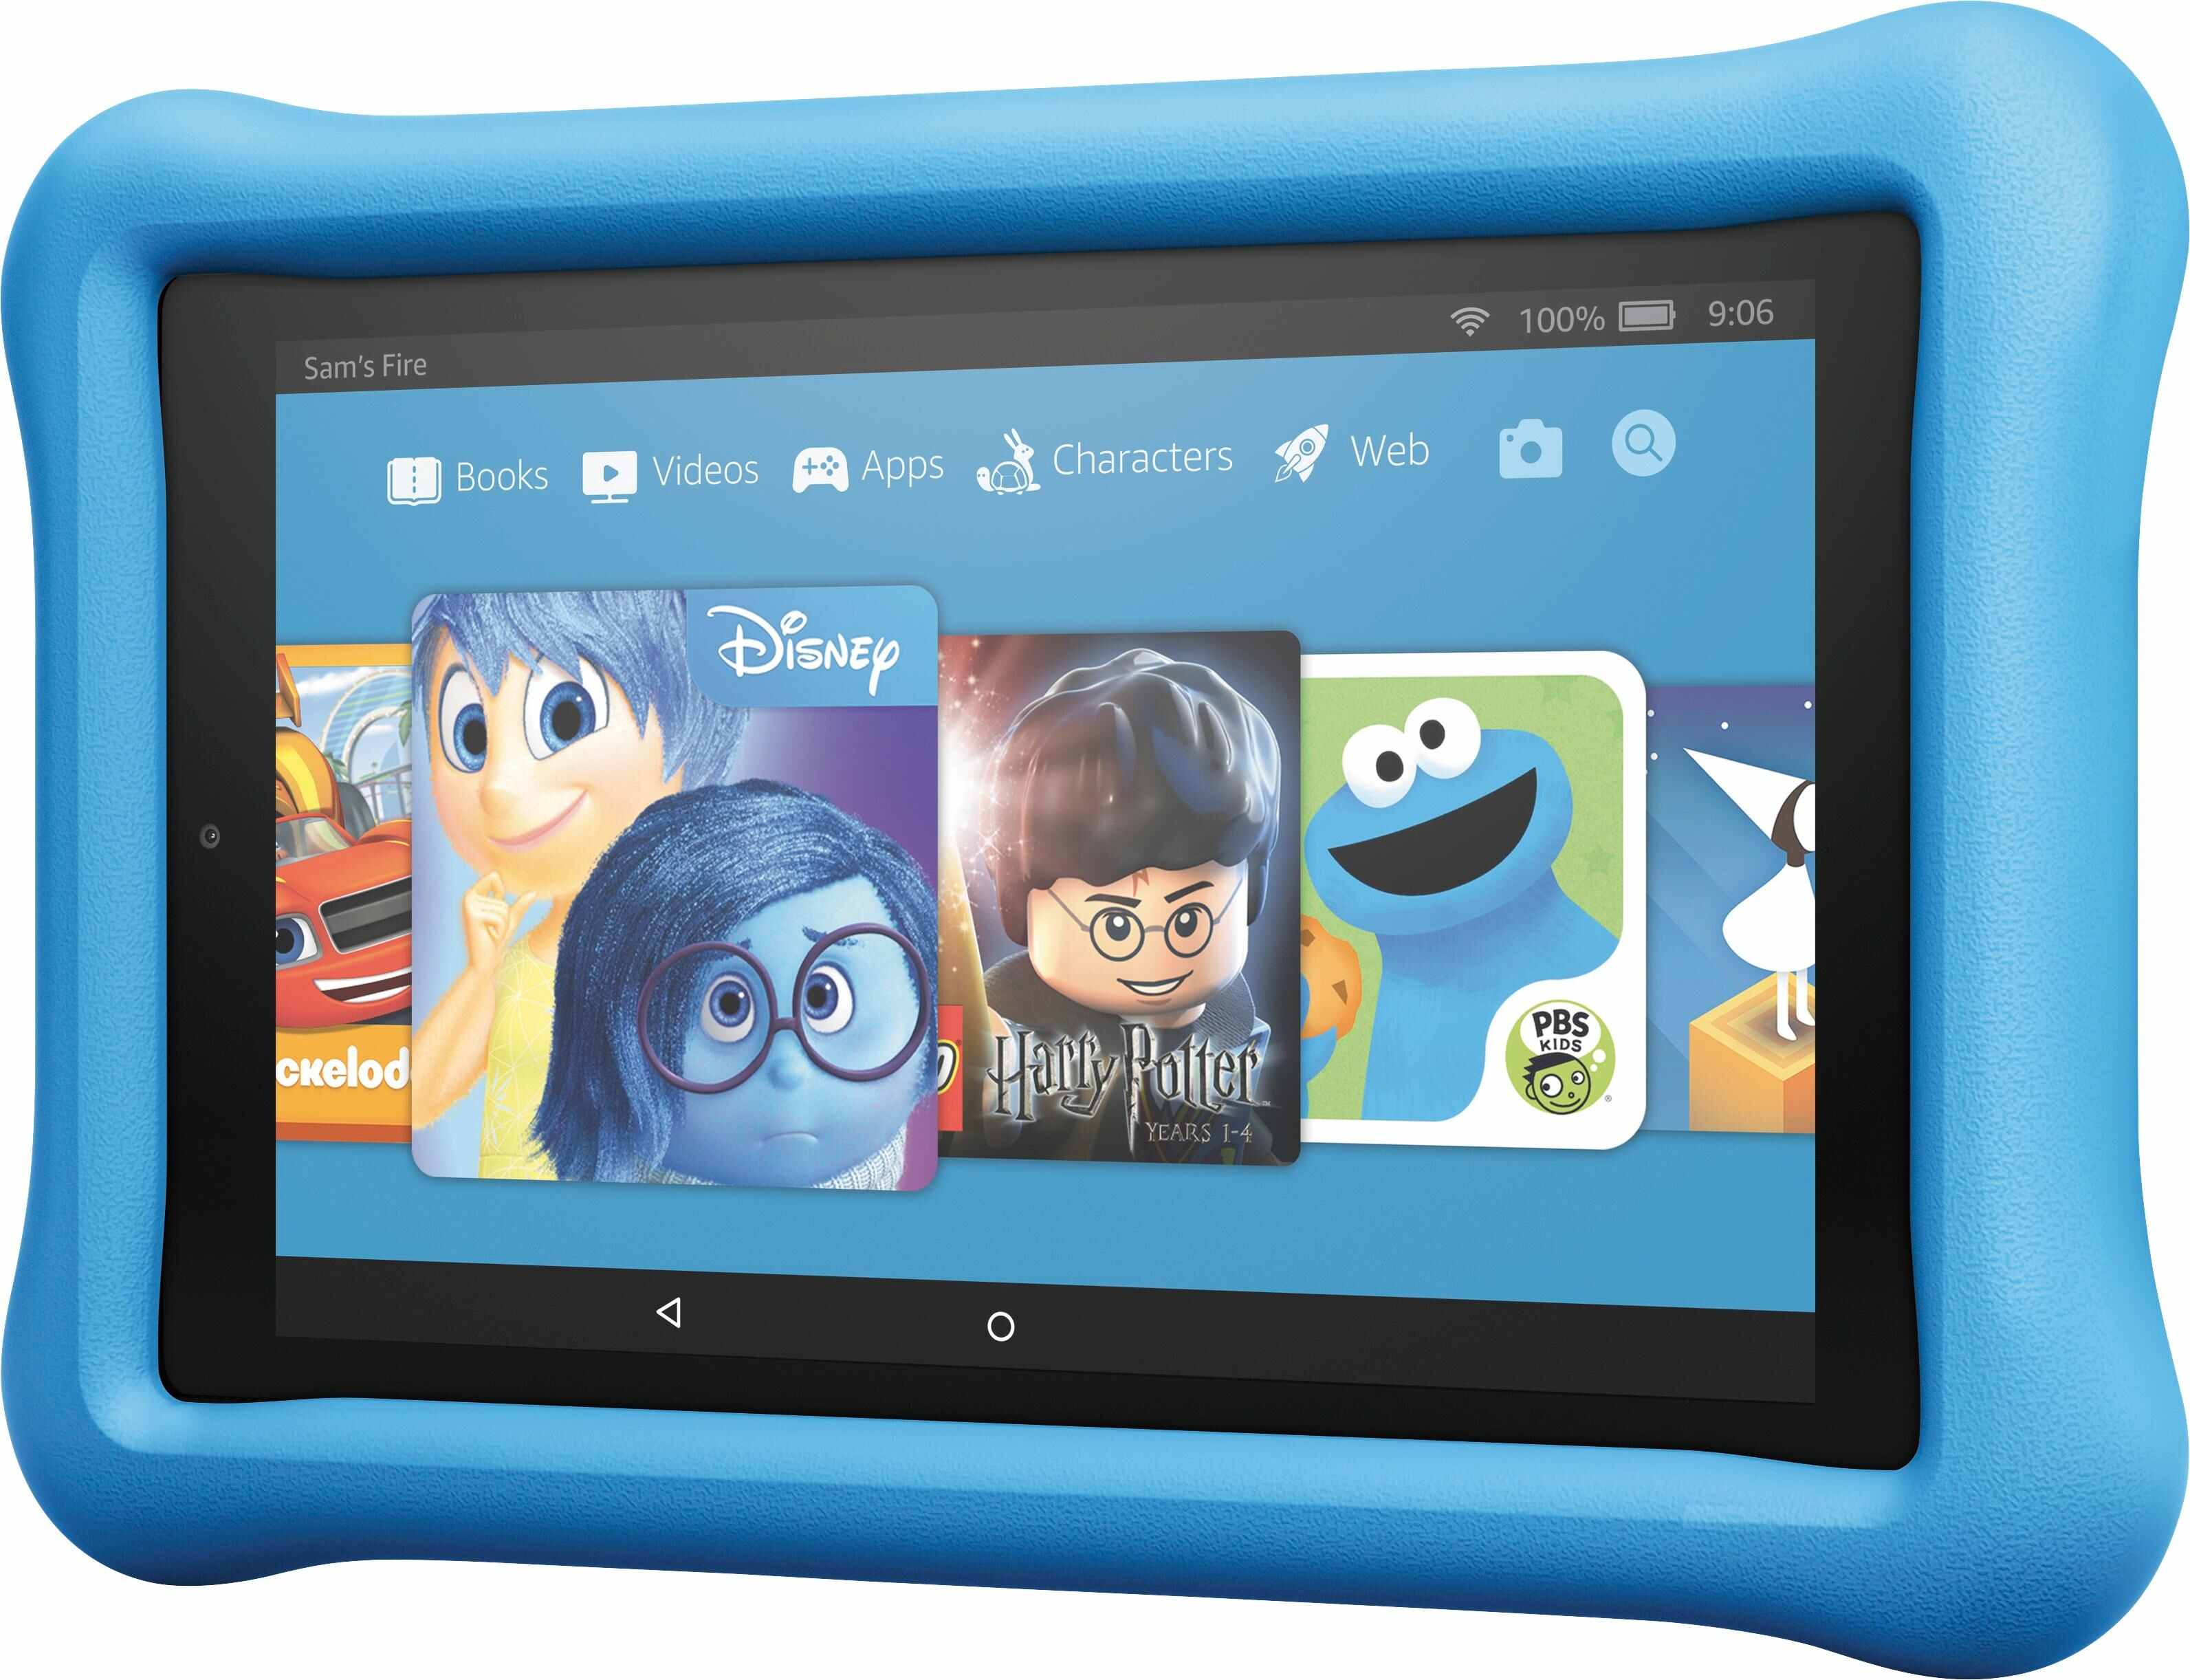 How To Set Up Amazon Fire Tablet For Child